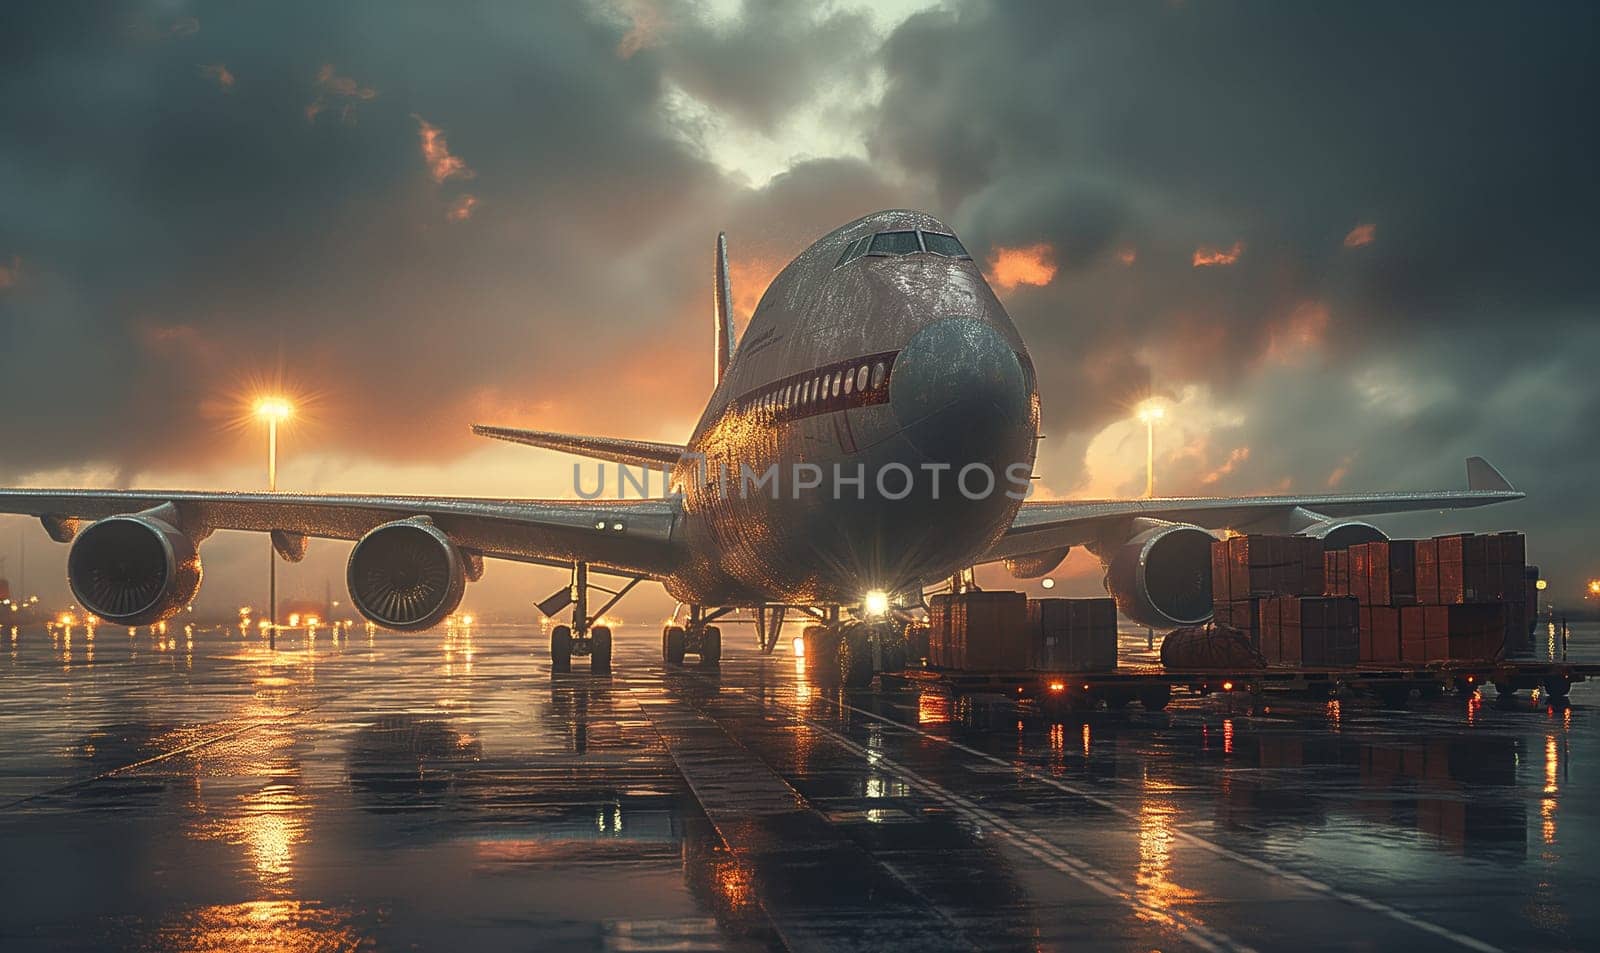 Large Jetliner Parked on Airport Tarmac. by Fischeron